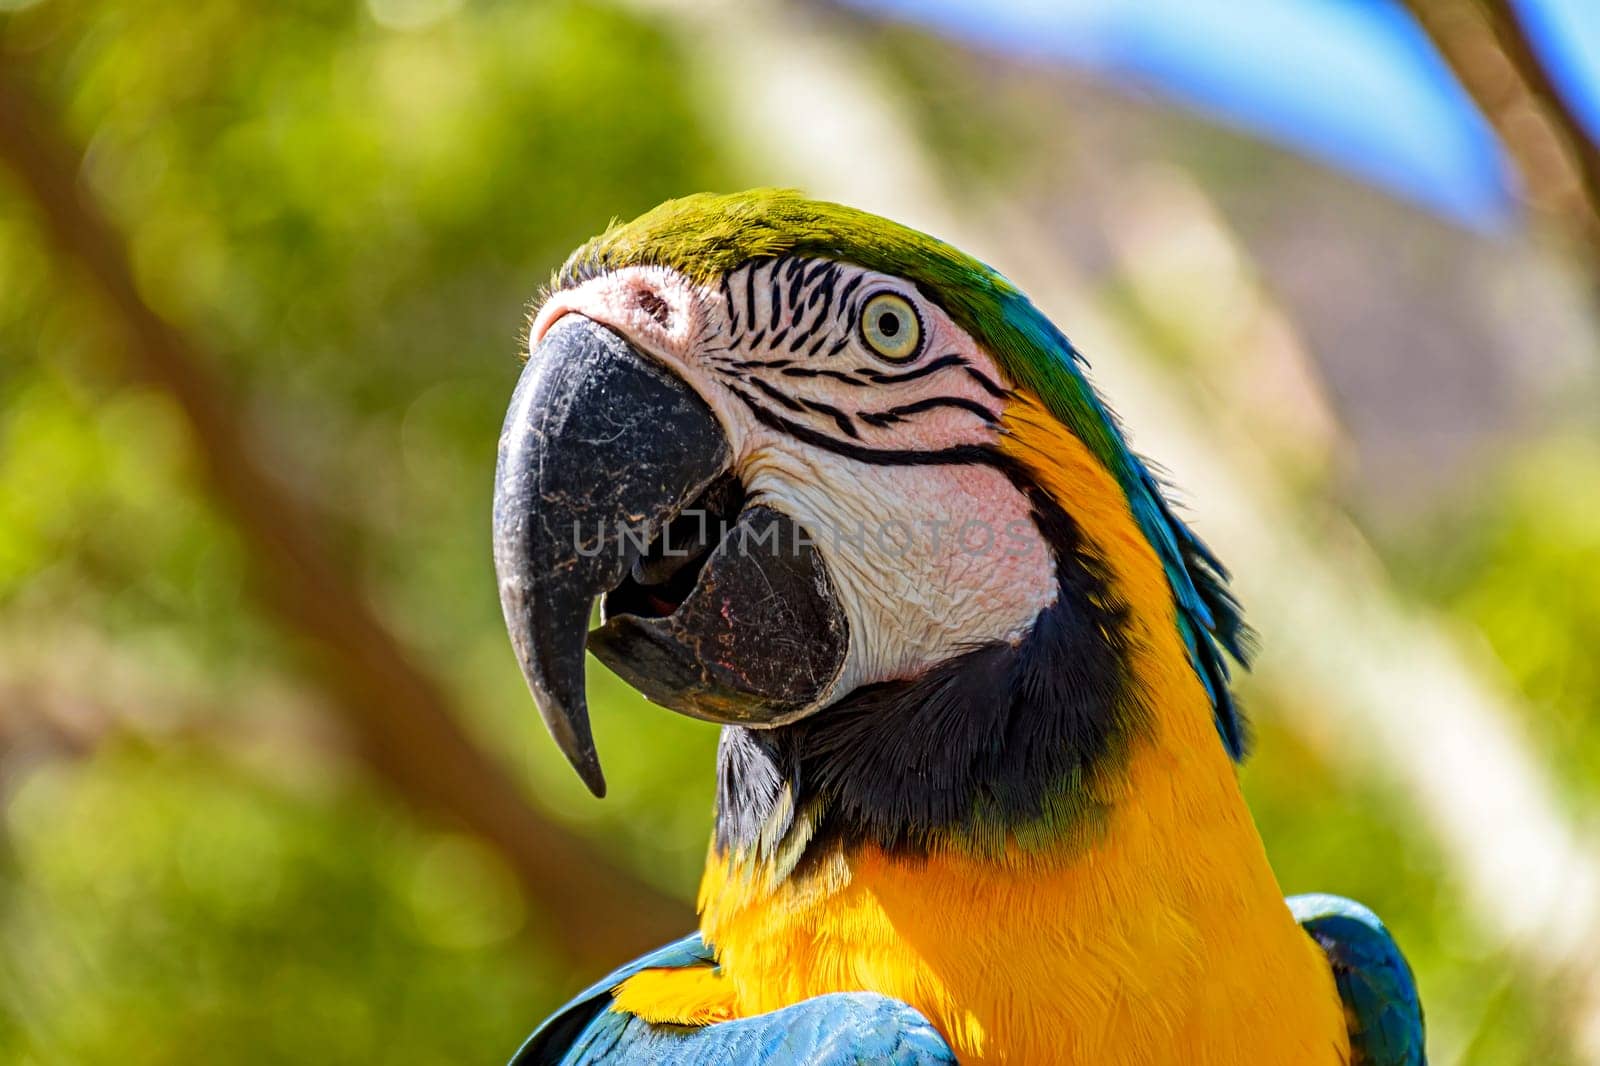 Macaw perched on a branch by Fred_Pinheiro